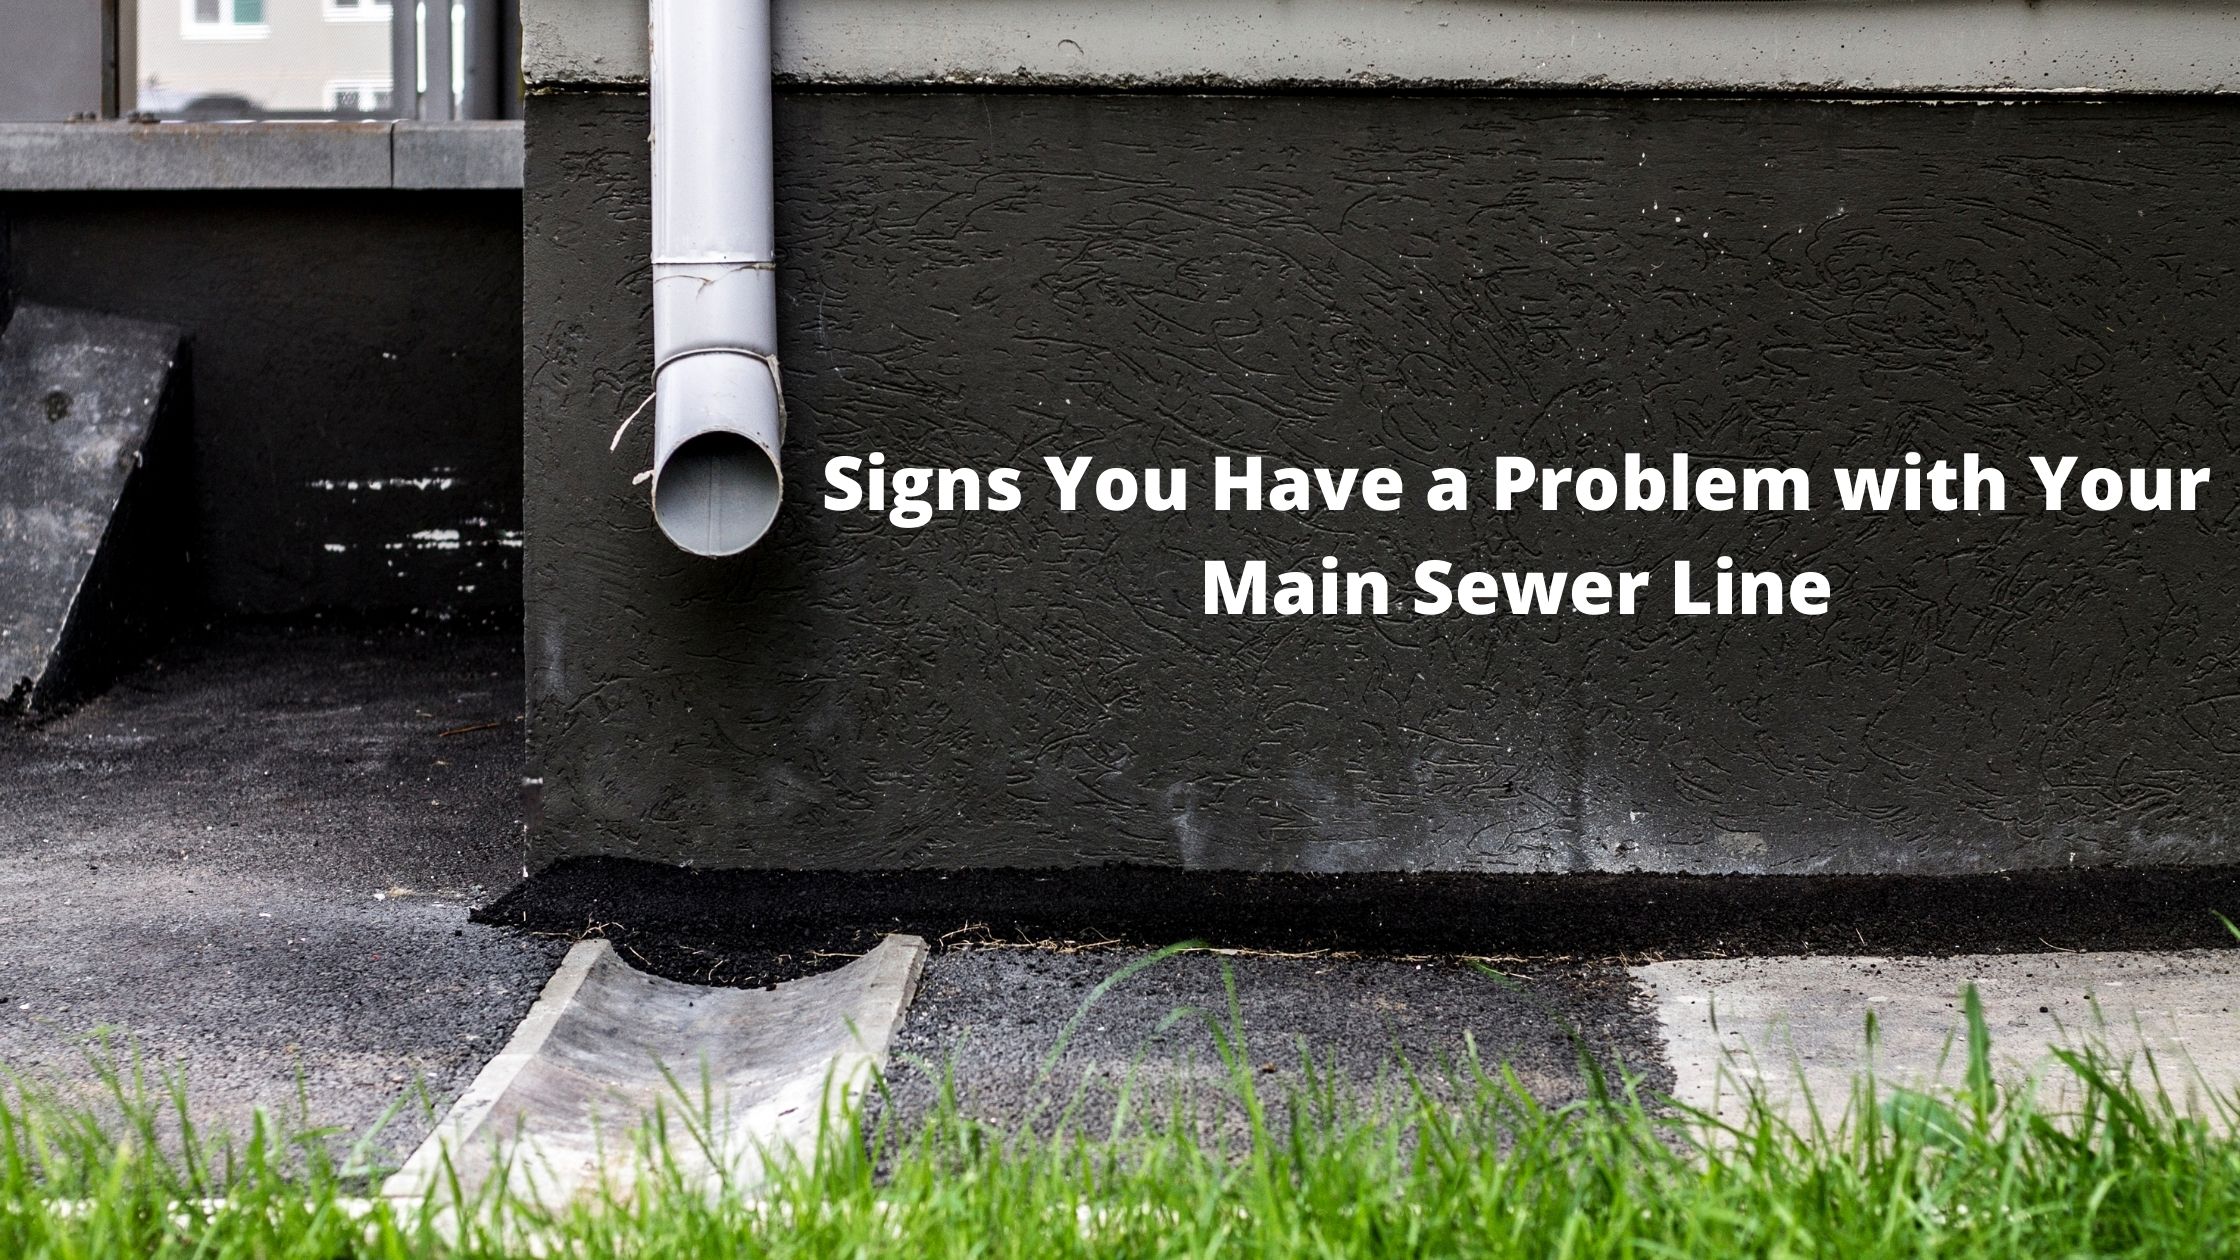 https://www.accurateleak.com/wp-content/uploads/2020/11/Signs-You-Have-a-Problem-with-Your-Main-Sewer-Line.jpg